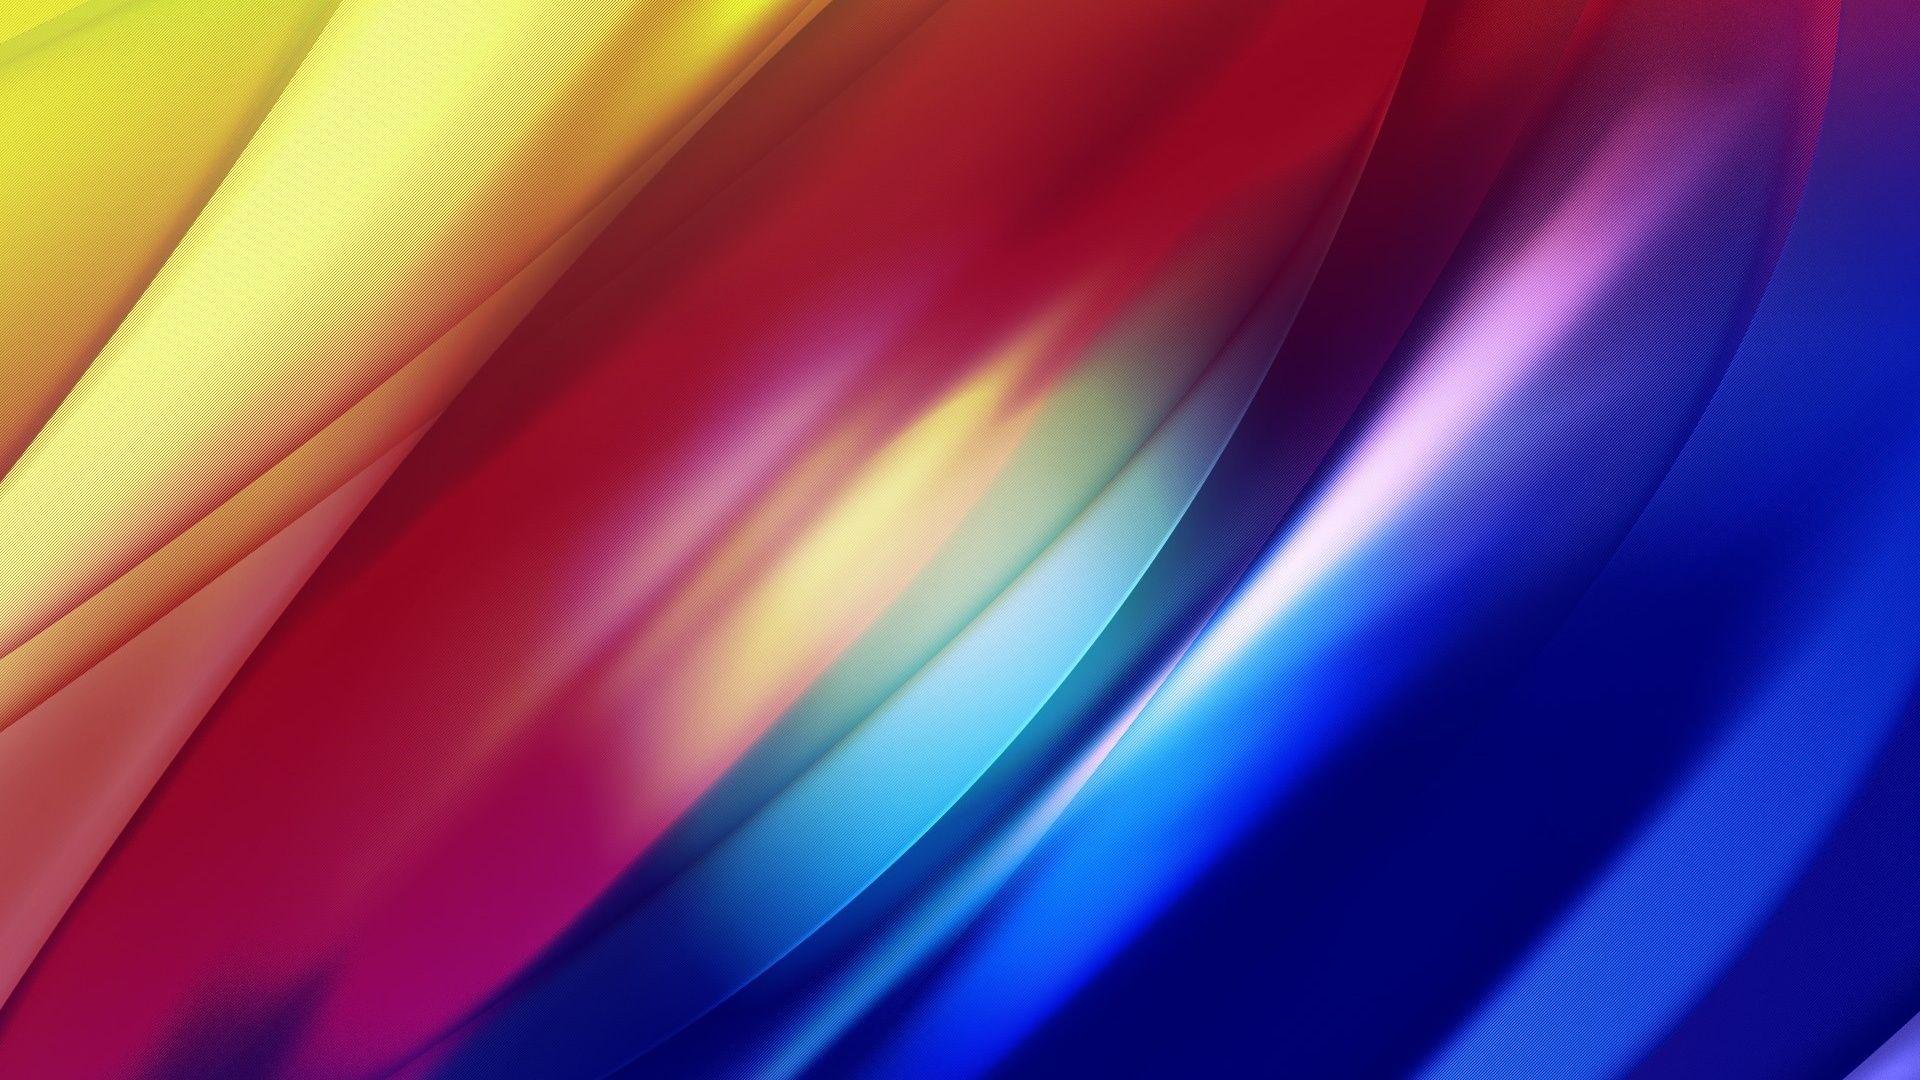 Abstract Colorful Pixelated Curves. Download HD Wallpaper